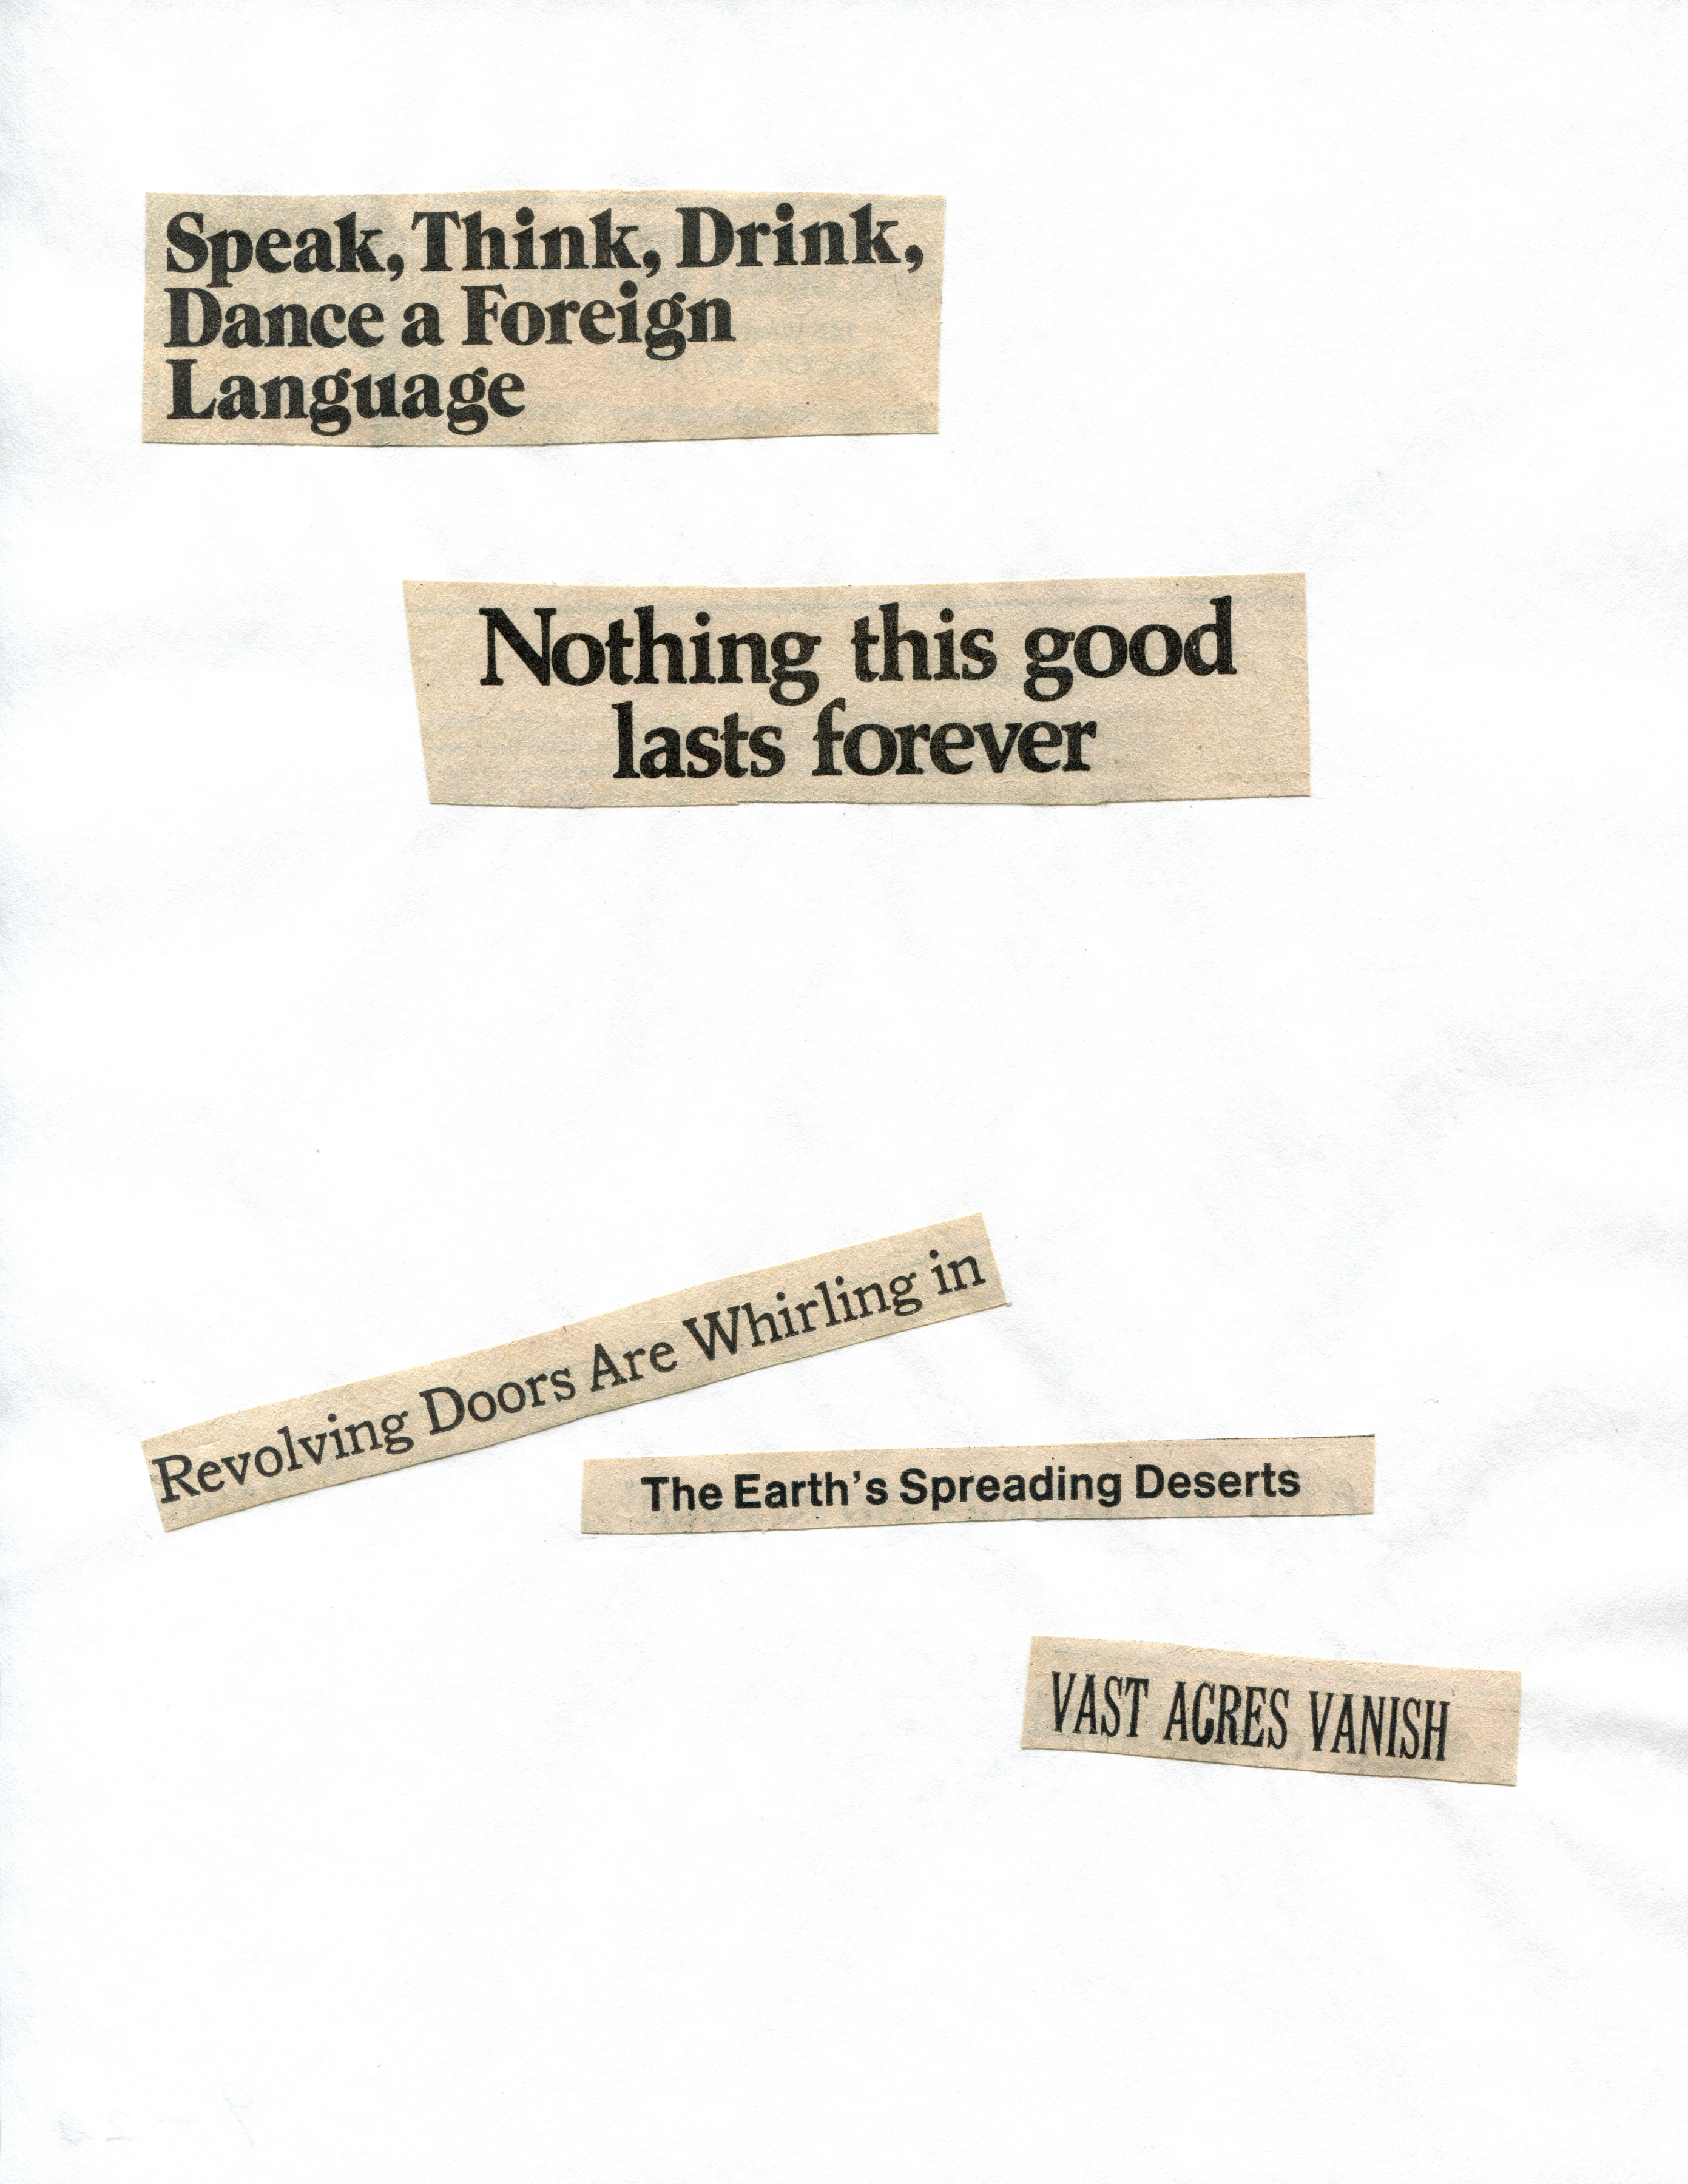 Cutting Out The New York Times, A Heroic Return,&nbsp;1977, Part 2 of 8, Toner ink on adhesive paper,&nbsp;11.02h x 7.87w in (27.99h x 19.99w cm)